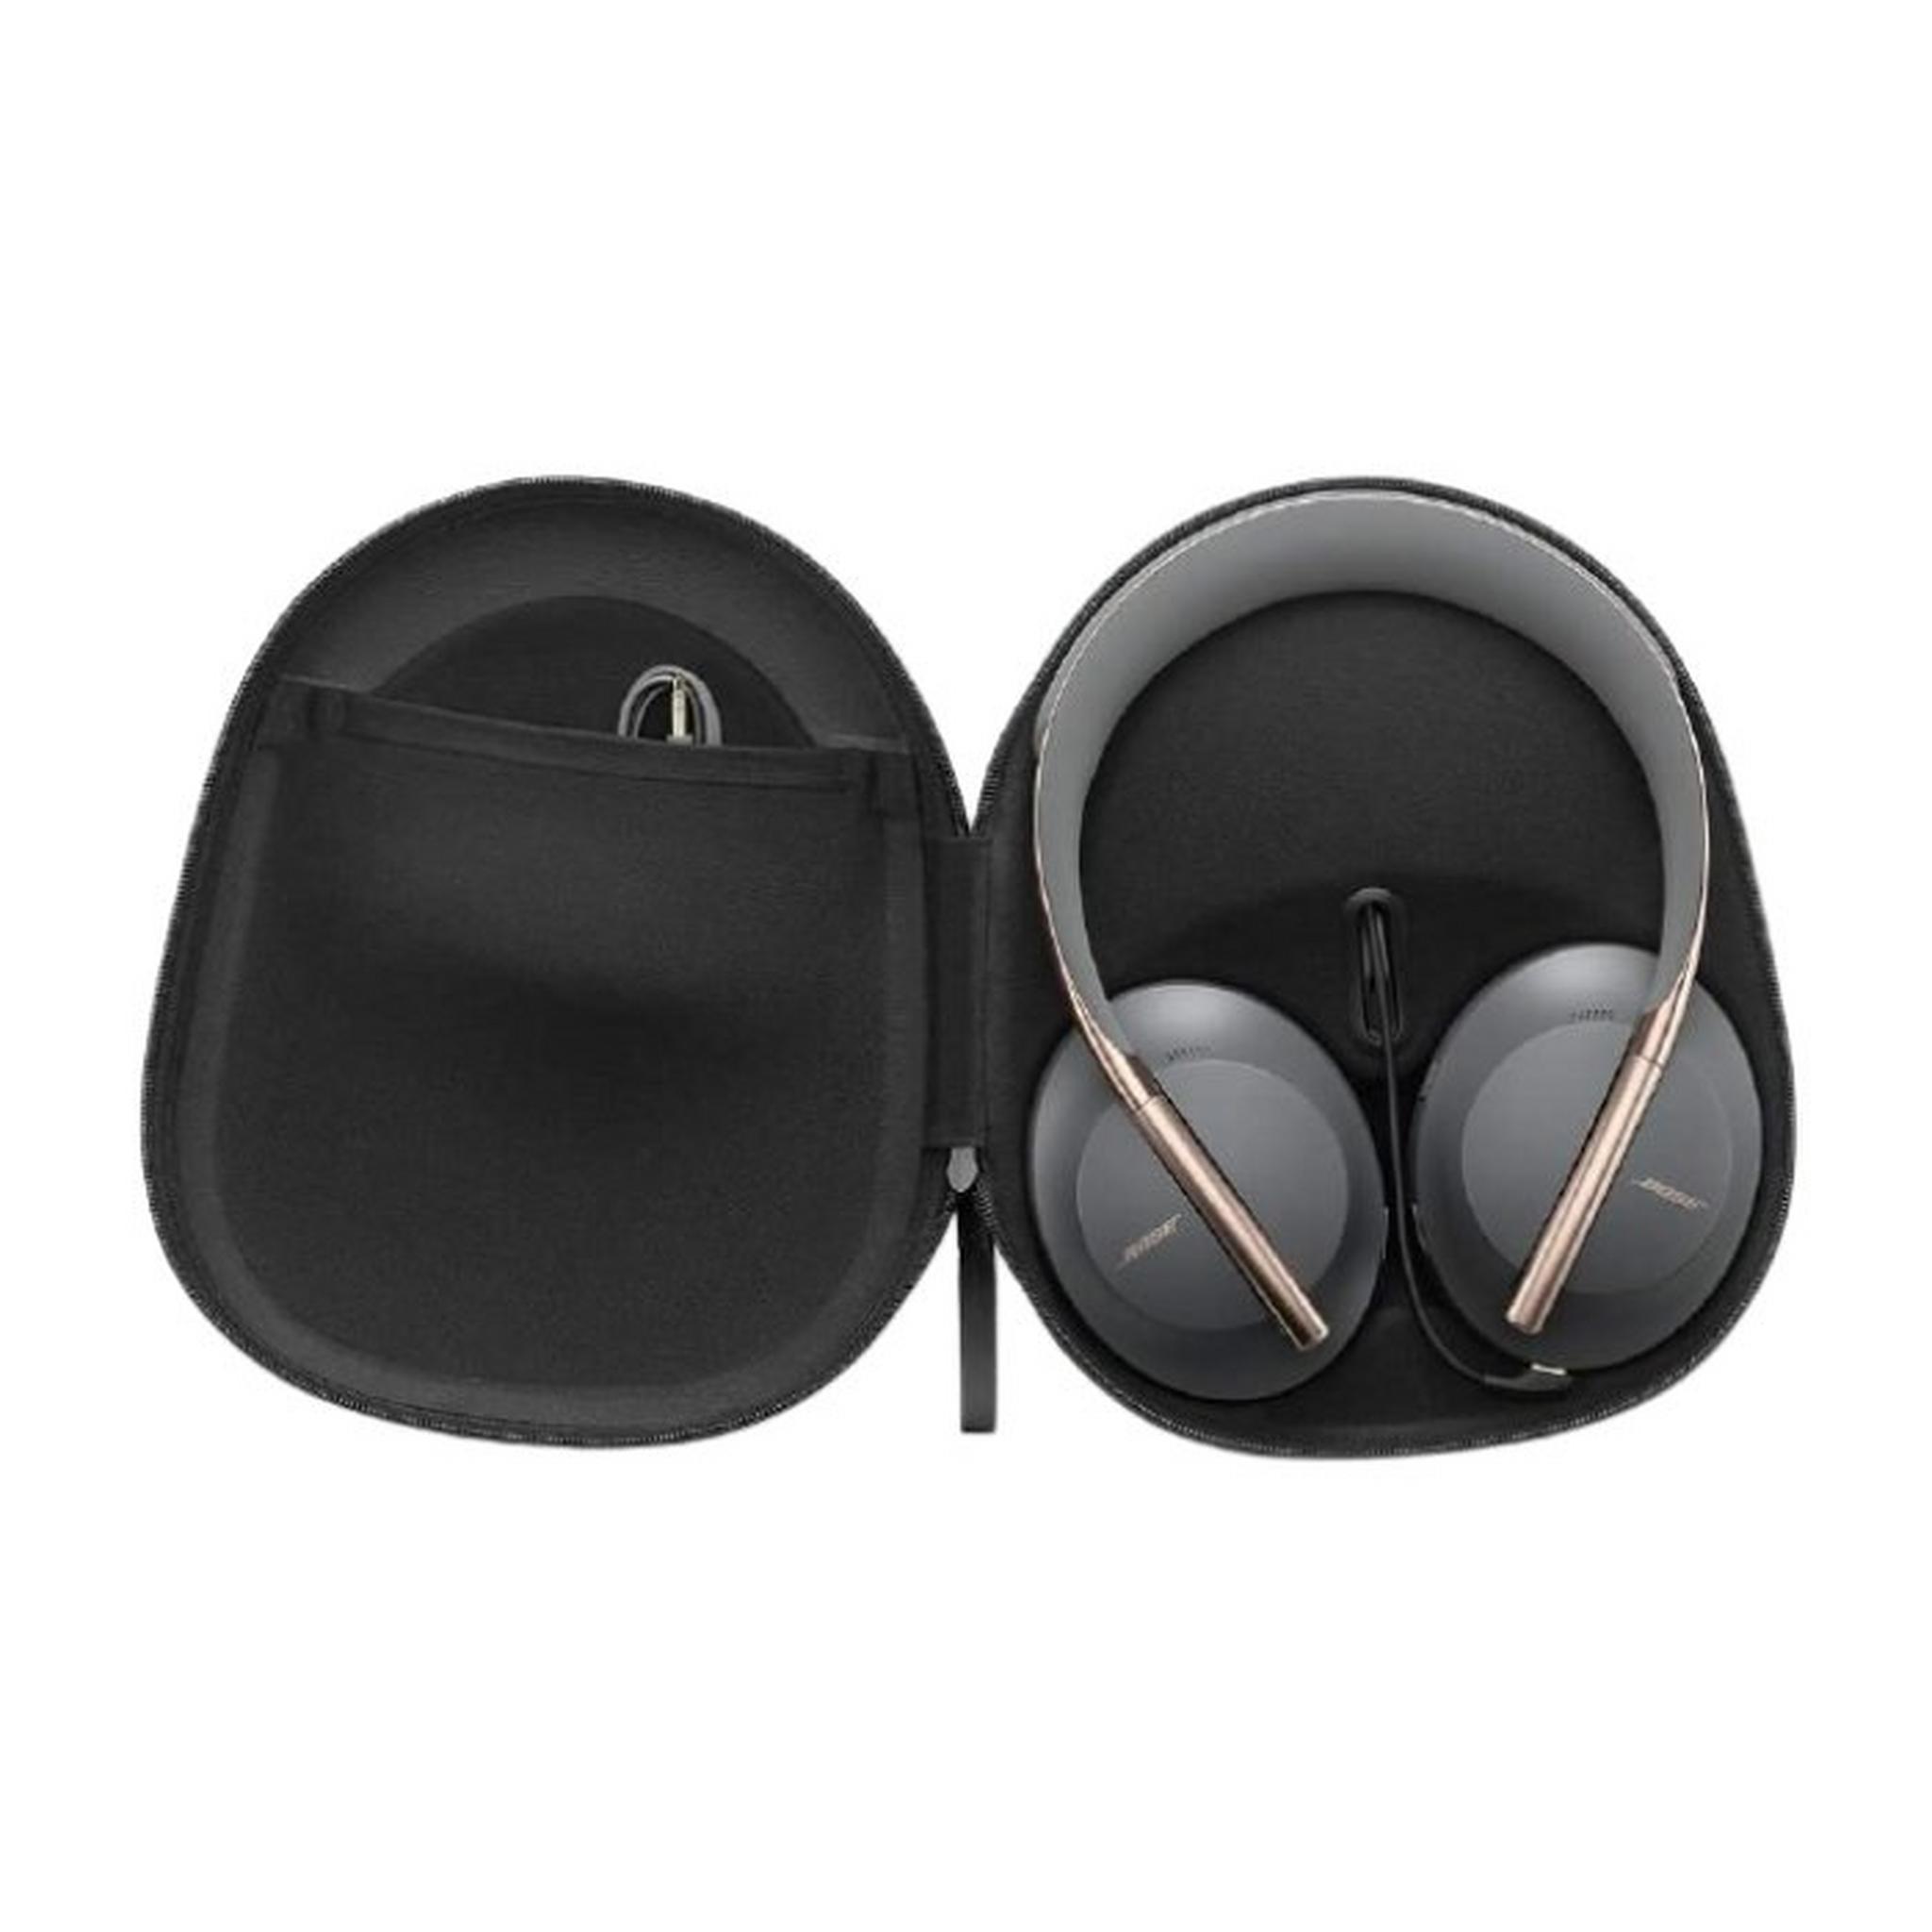 Bose Wireless Noise Cancelling Headphones 700 with Charging Case - Eclipse Limited Edition - Smoke Gray